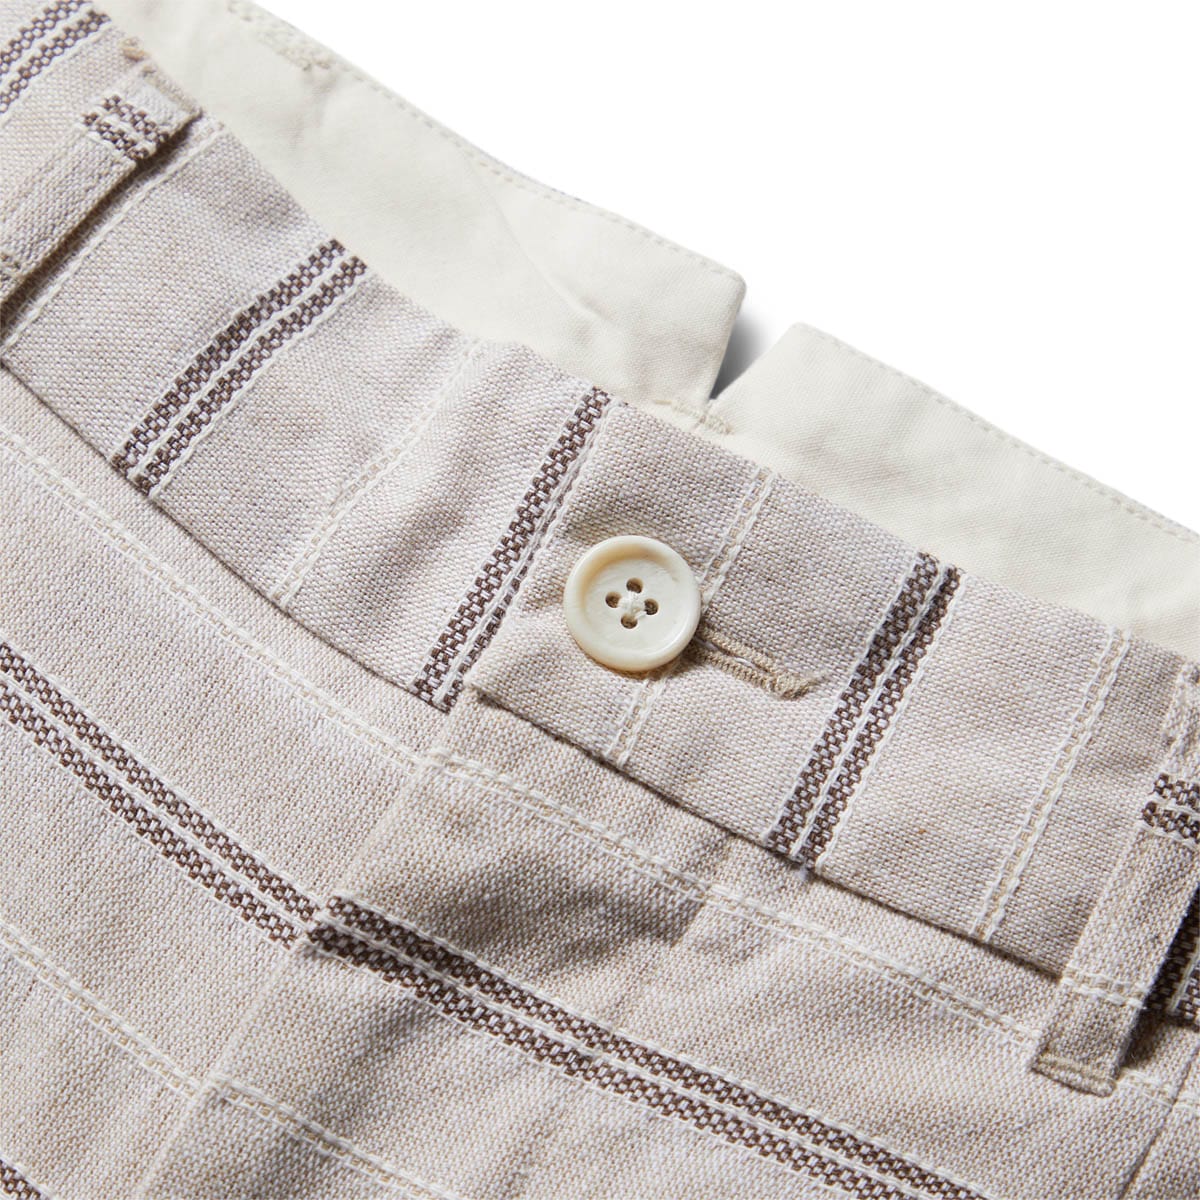 Engineered Garments Bottoms ANDOVER PANT